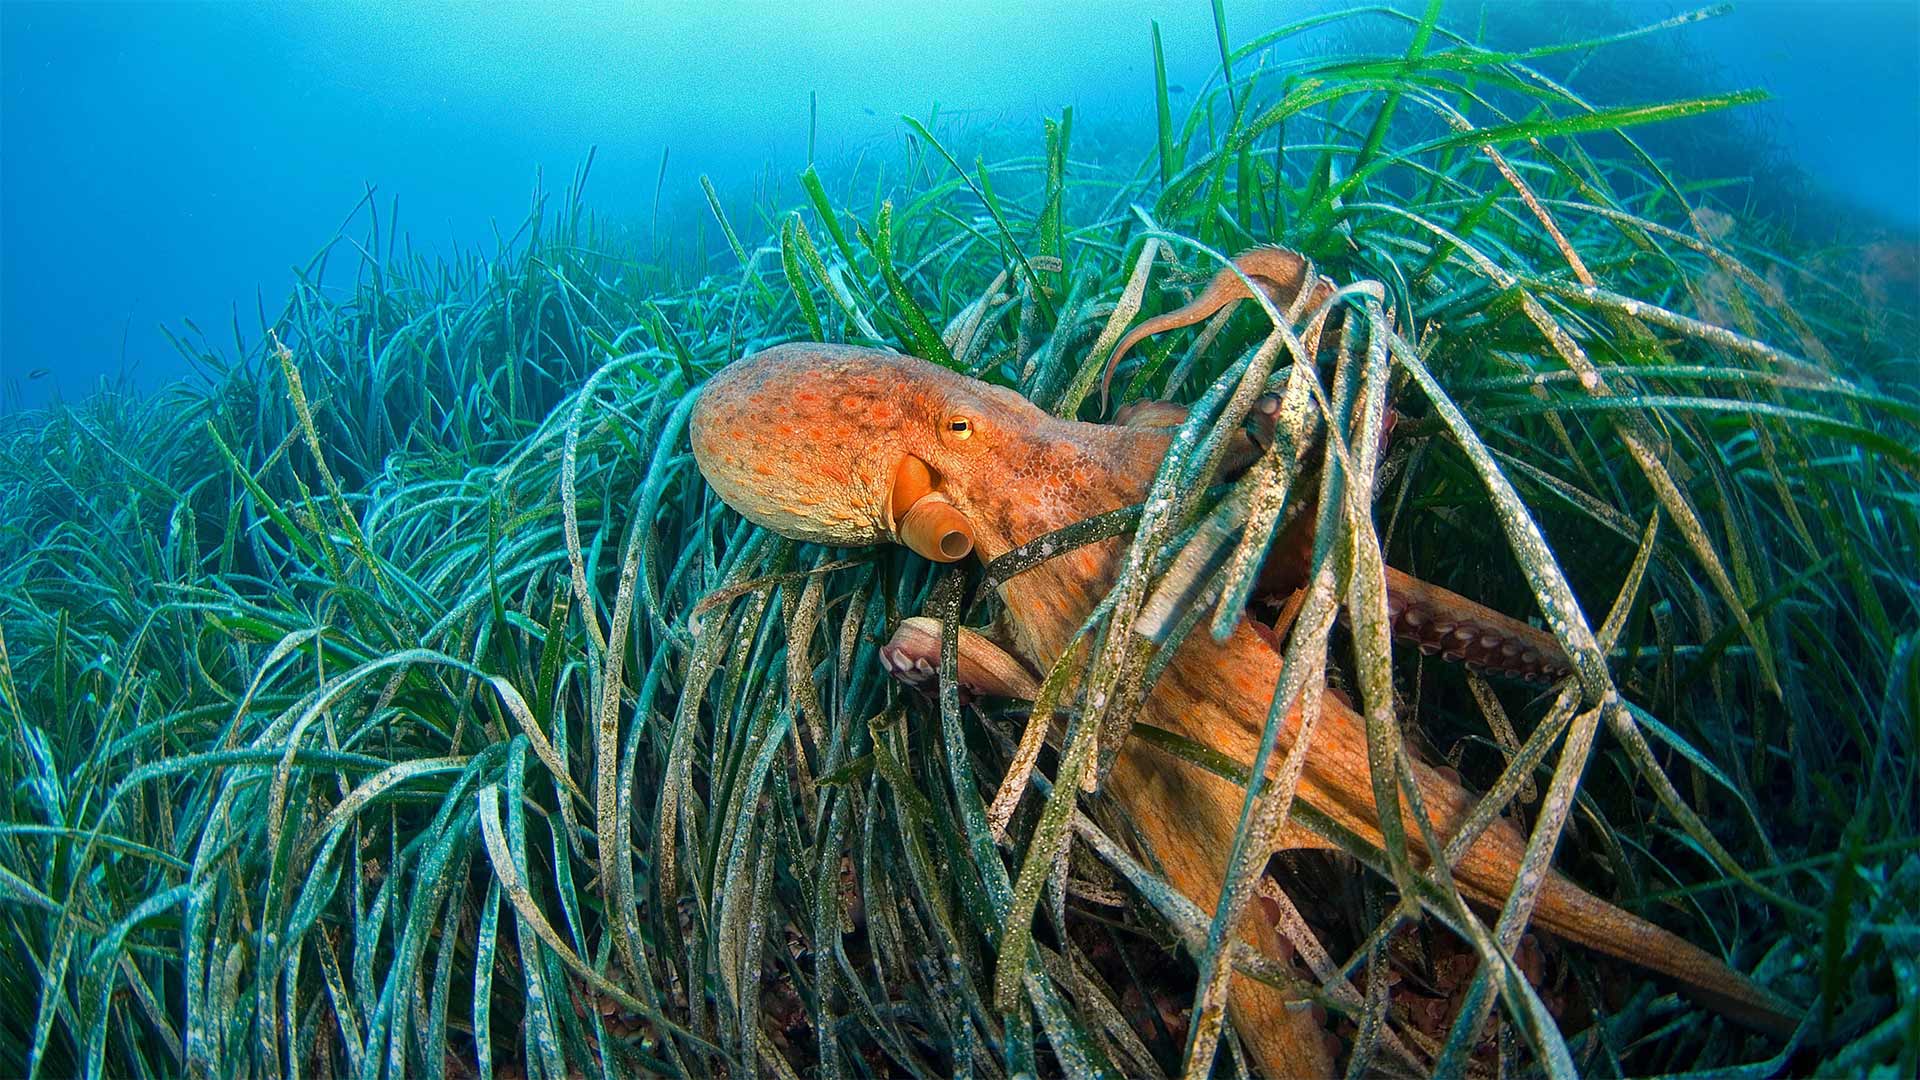 Common octopus off the coast of France in the Mediterranean Sea - BIOSPHOTO/Alamy)